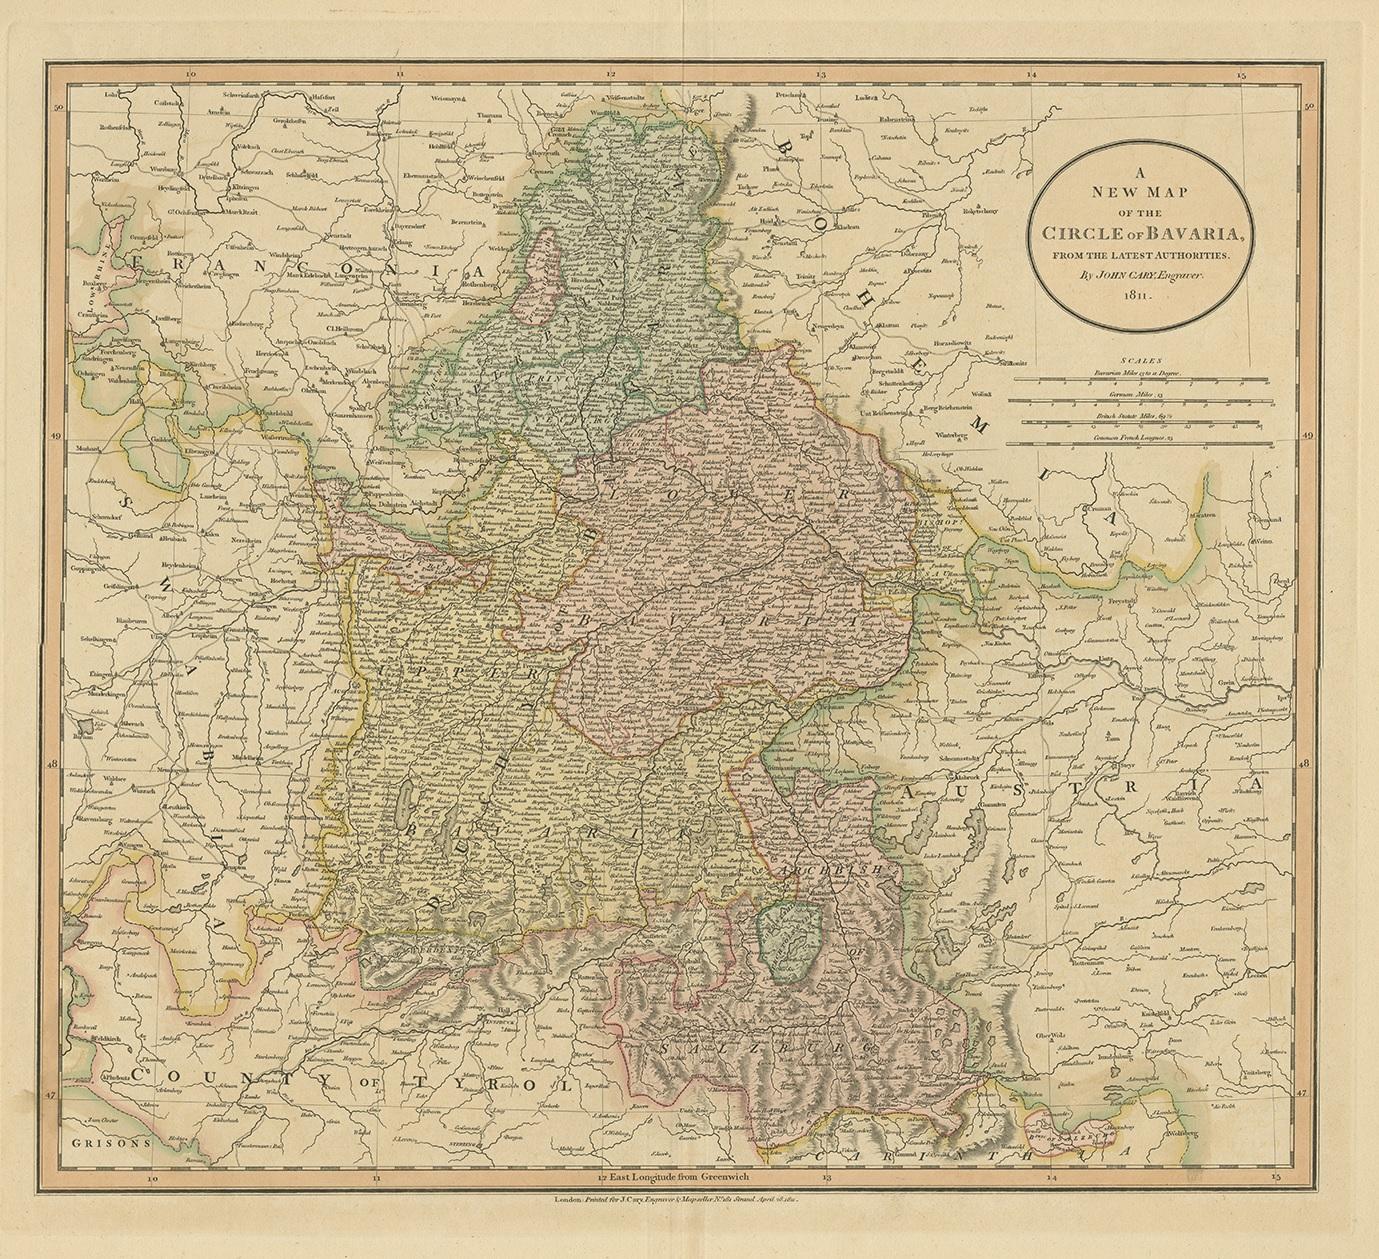 Antique map titled 'A New Map of the Circle of Bavaria'. Antique map of Bavaria and Salzburg, Germany. Covers the Duchy of Bavaria and the mountainous Archbishopric of Salzburg as well as parts of Franconia, Swabia, Tyrol, Bohemia and Austria.